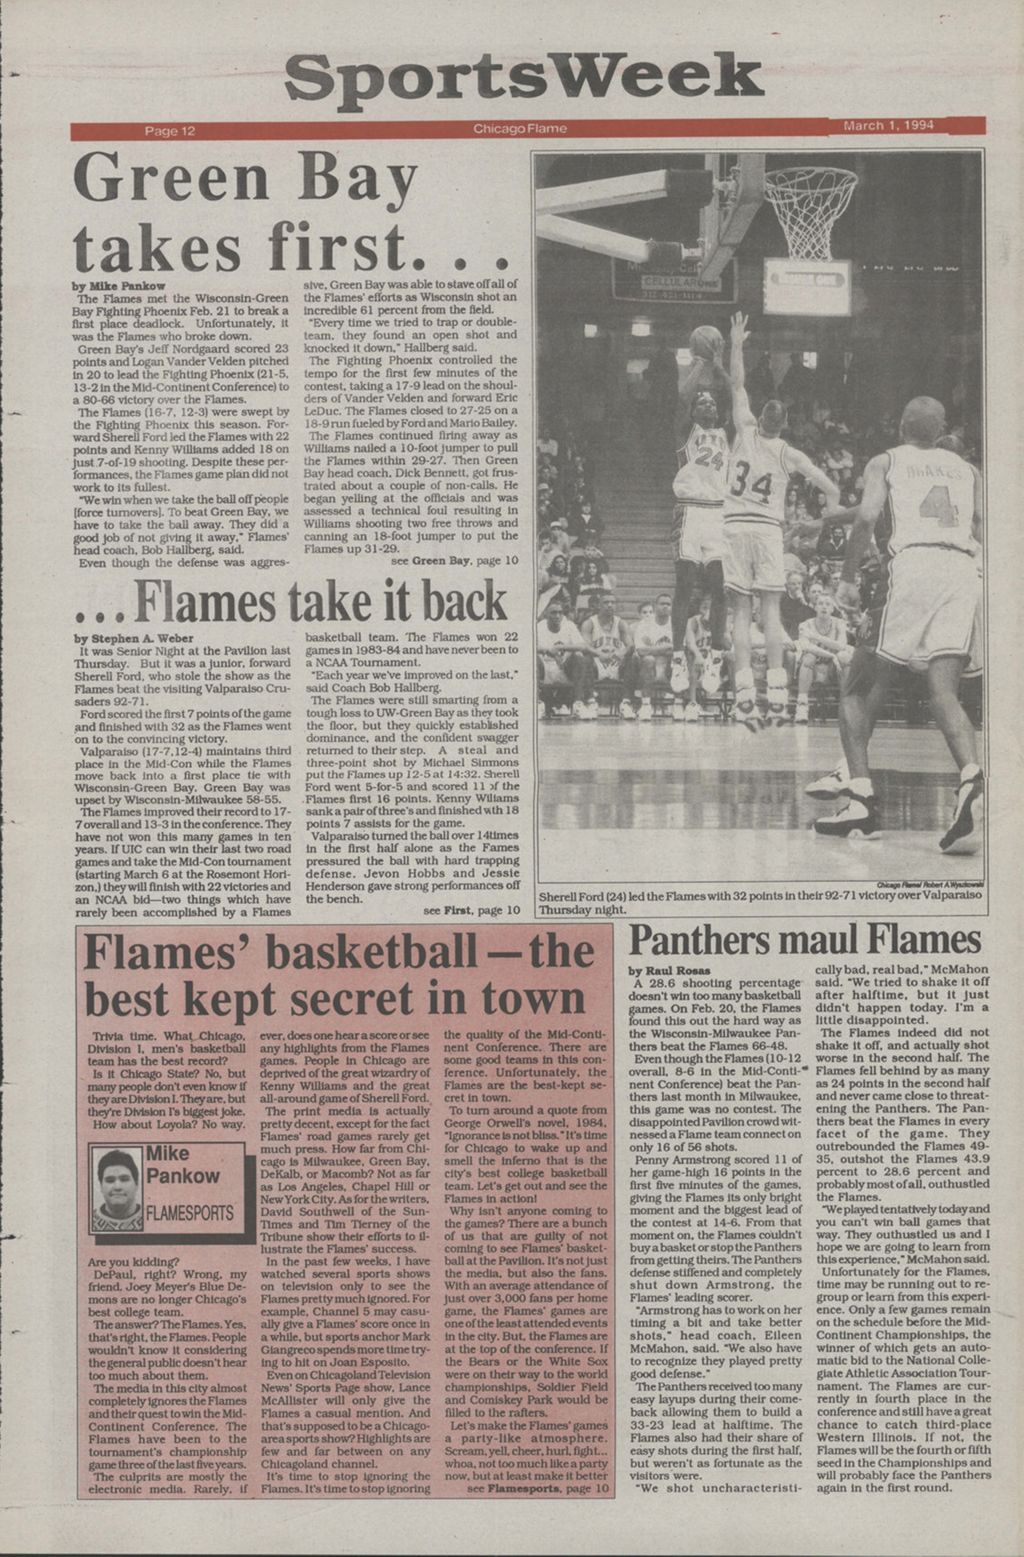 Miniature of Chicago Flame (March 1, 1994)